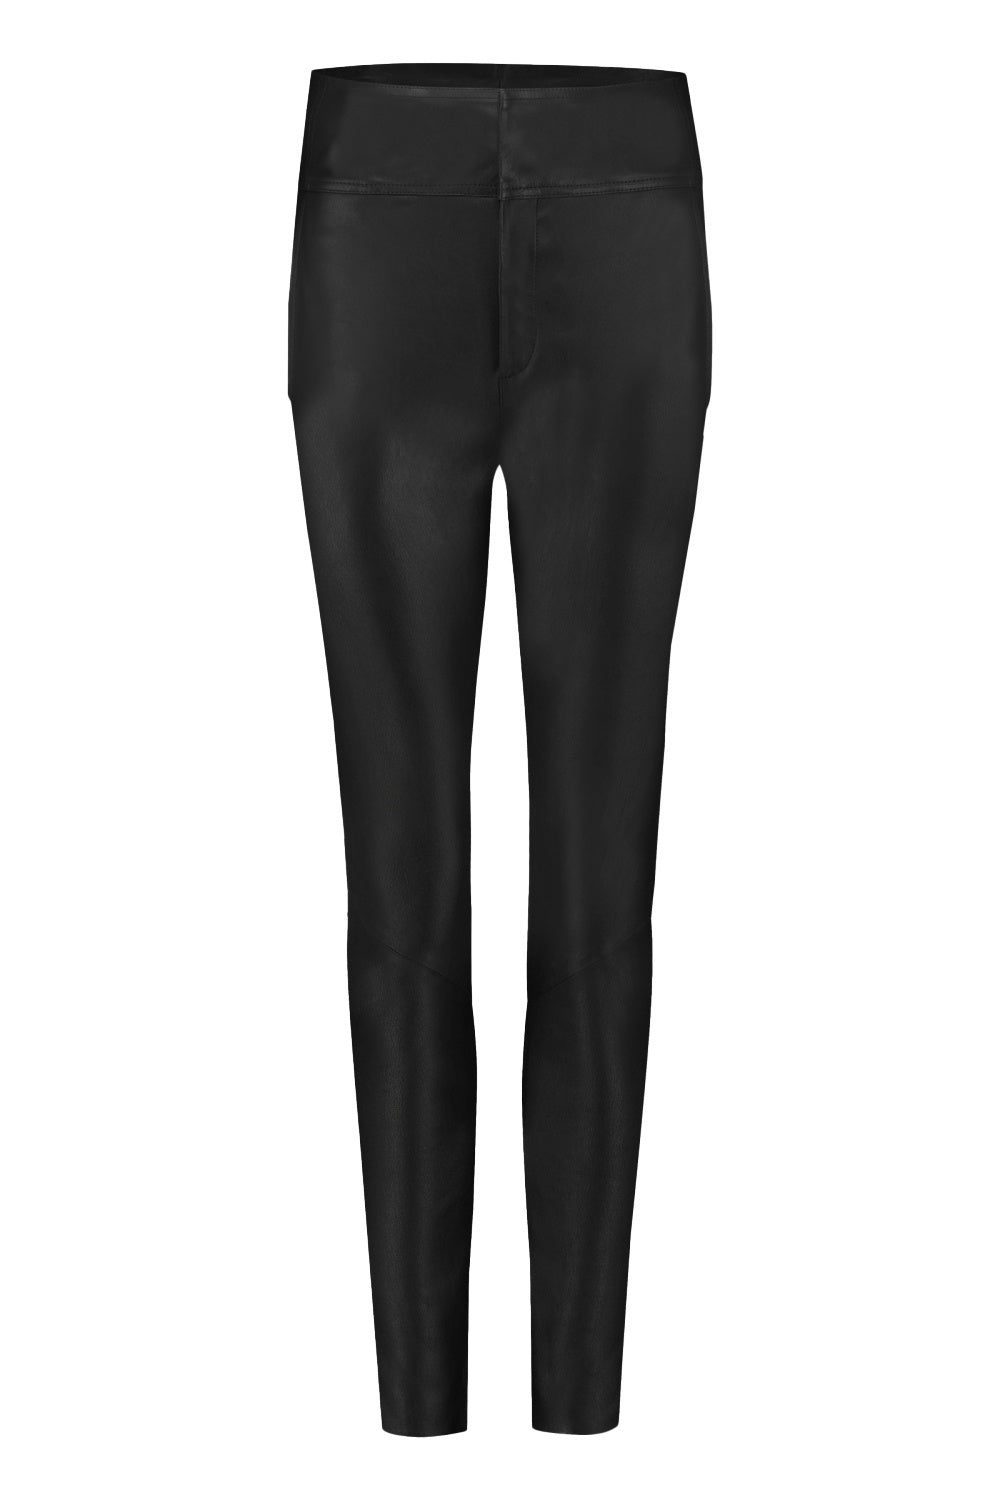 Pananty Leather Pant - Black